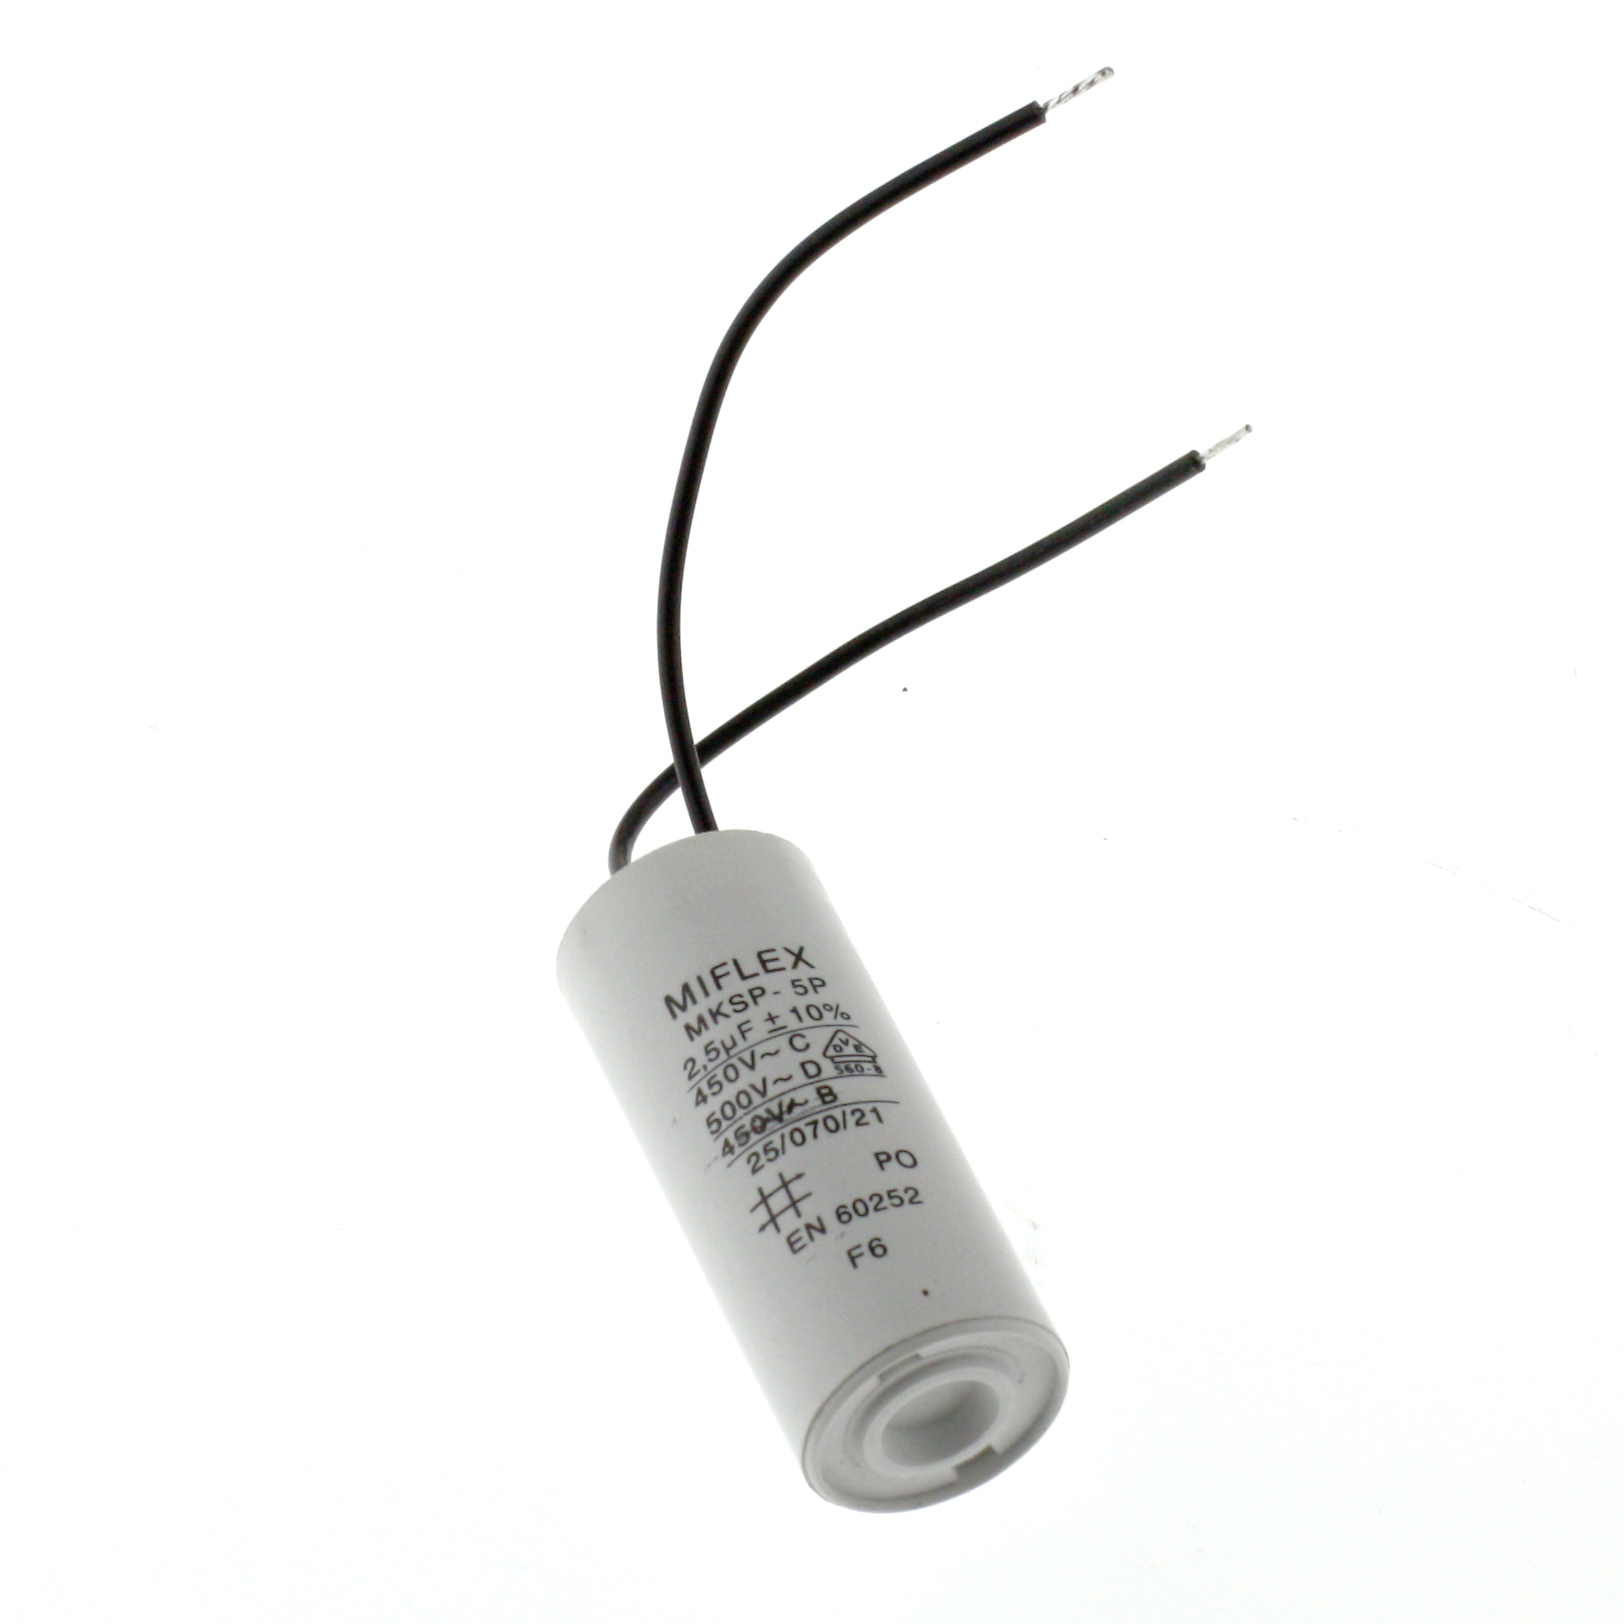 Motor Capacitor 2,5uF-450V, 25x51mm, cable connection